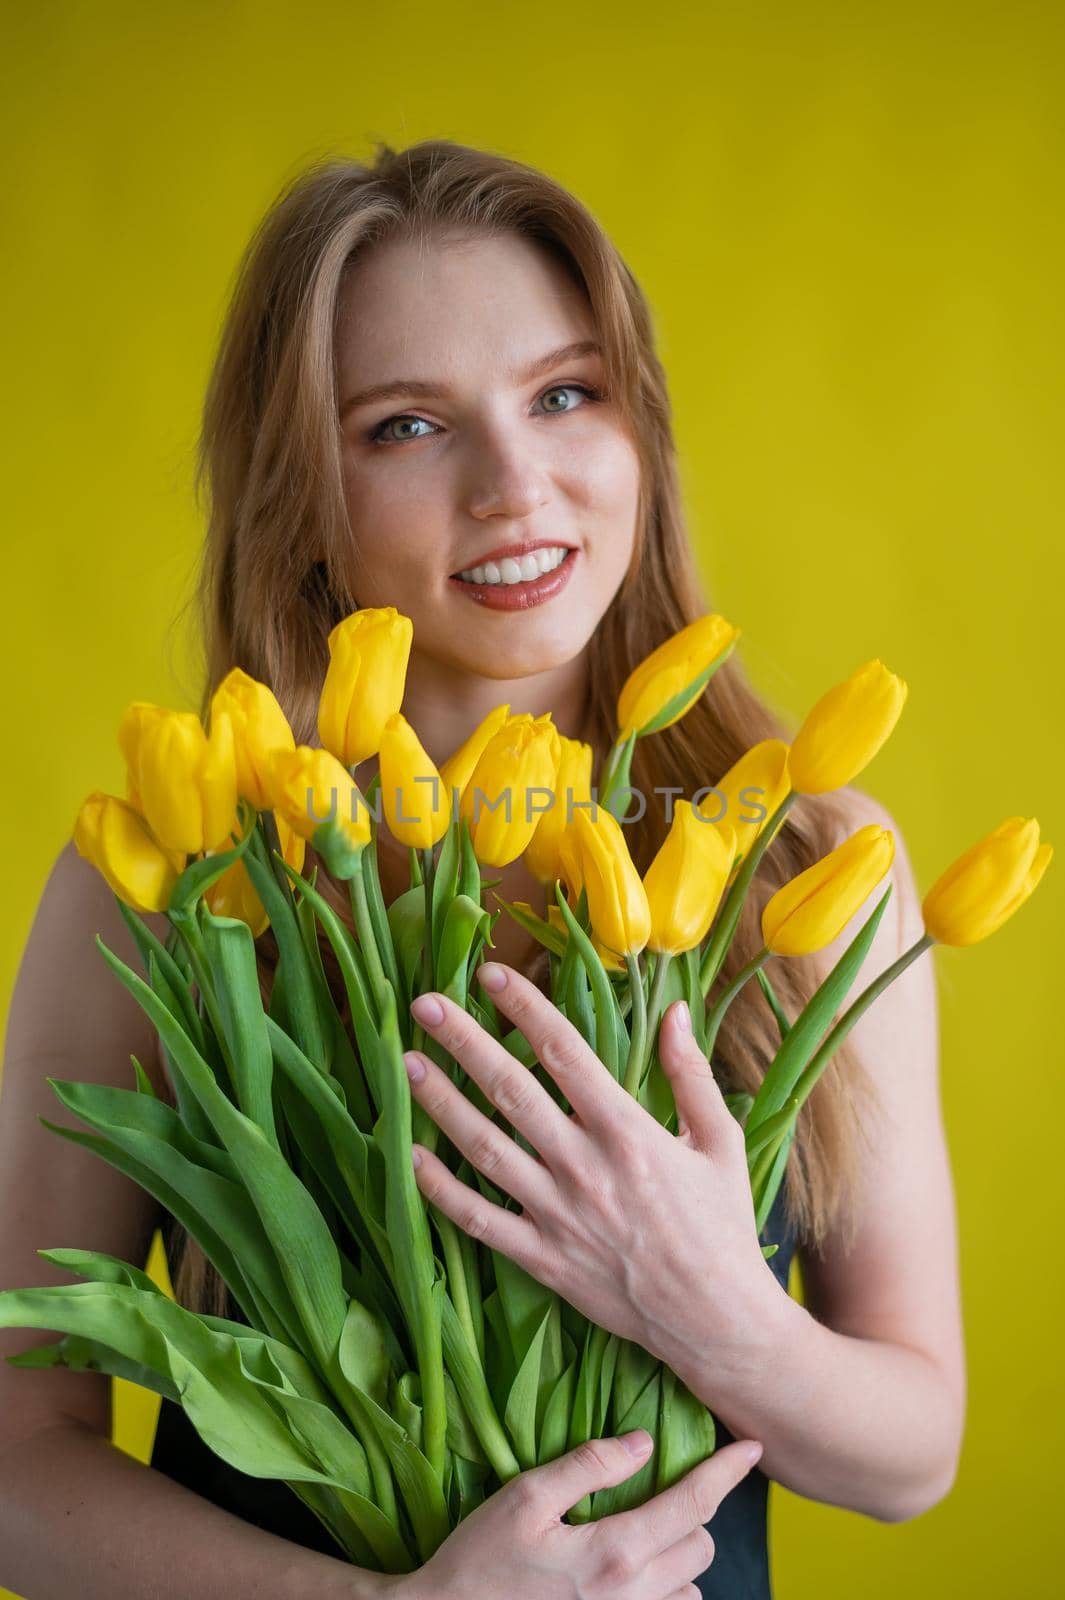 Caucasian woman with an armful of yellow tulips on a yellow background. International Women's Day. Bouquet of spring flowers.